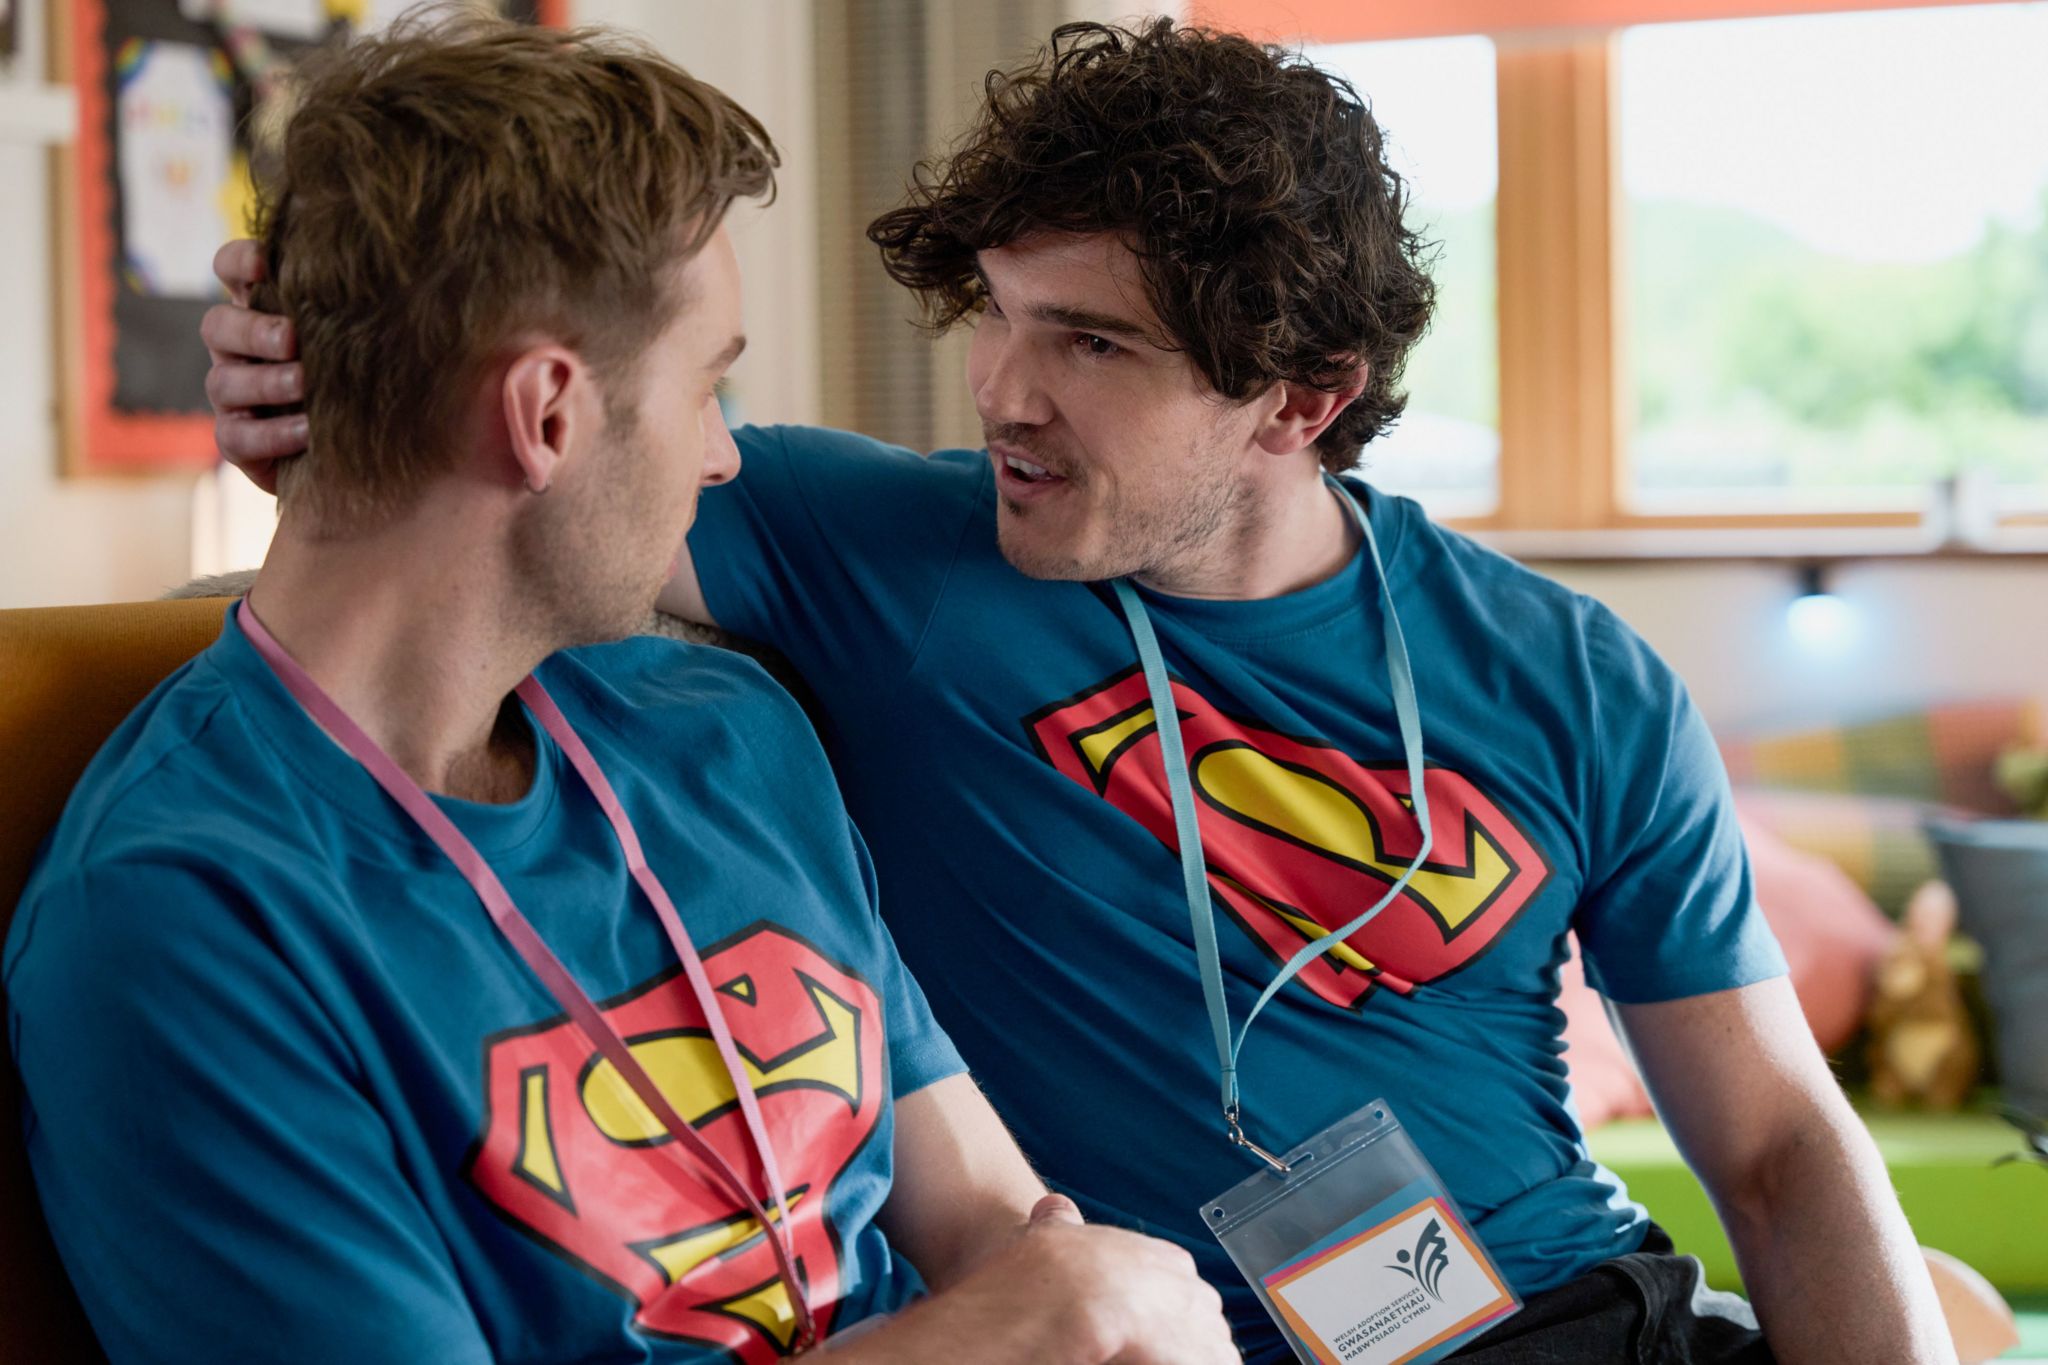 Gabriel (left) and Andy (right) are wearing blue t-shirts with the Superman logos on, and they're facing one another.